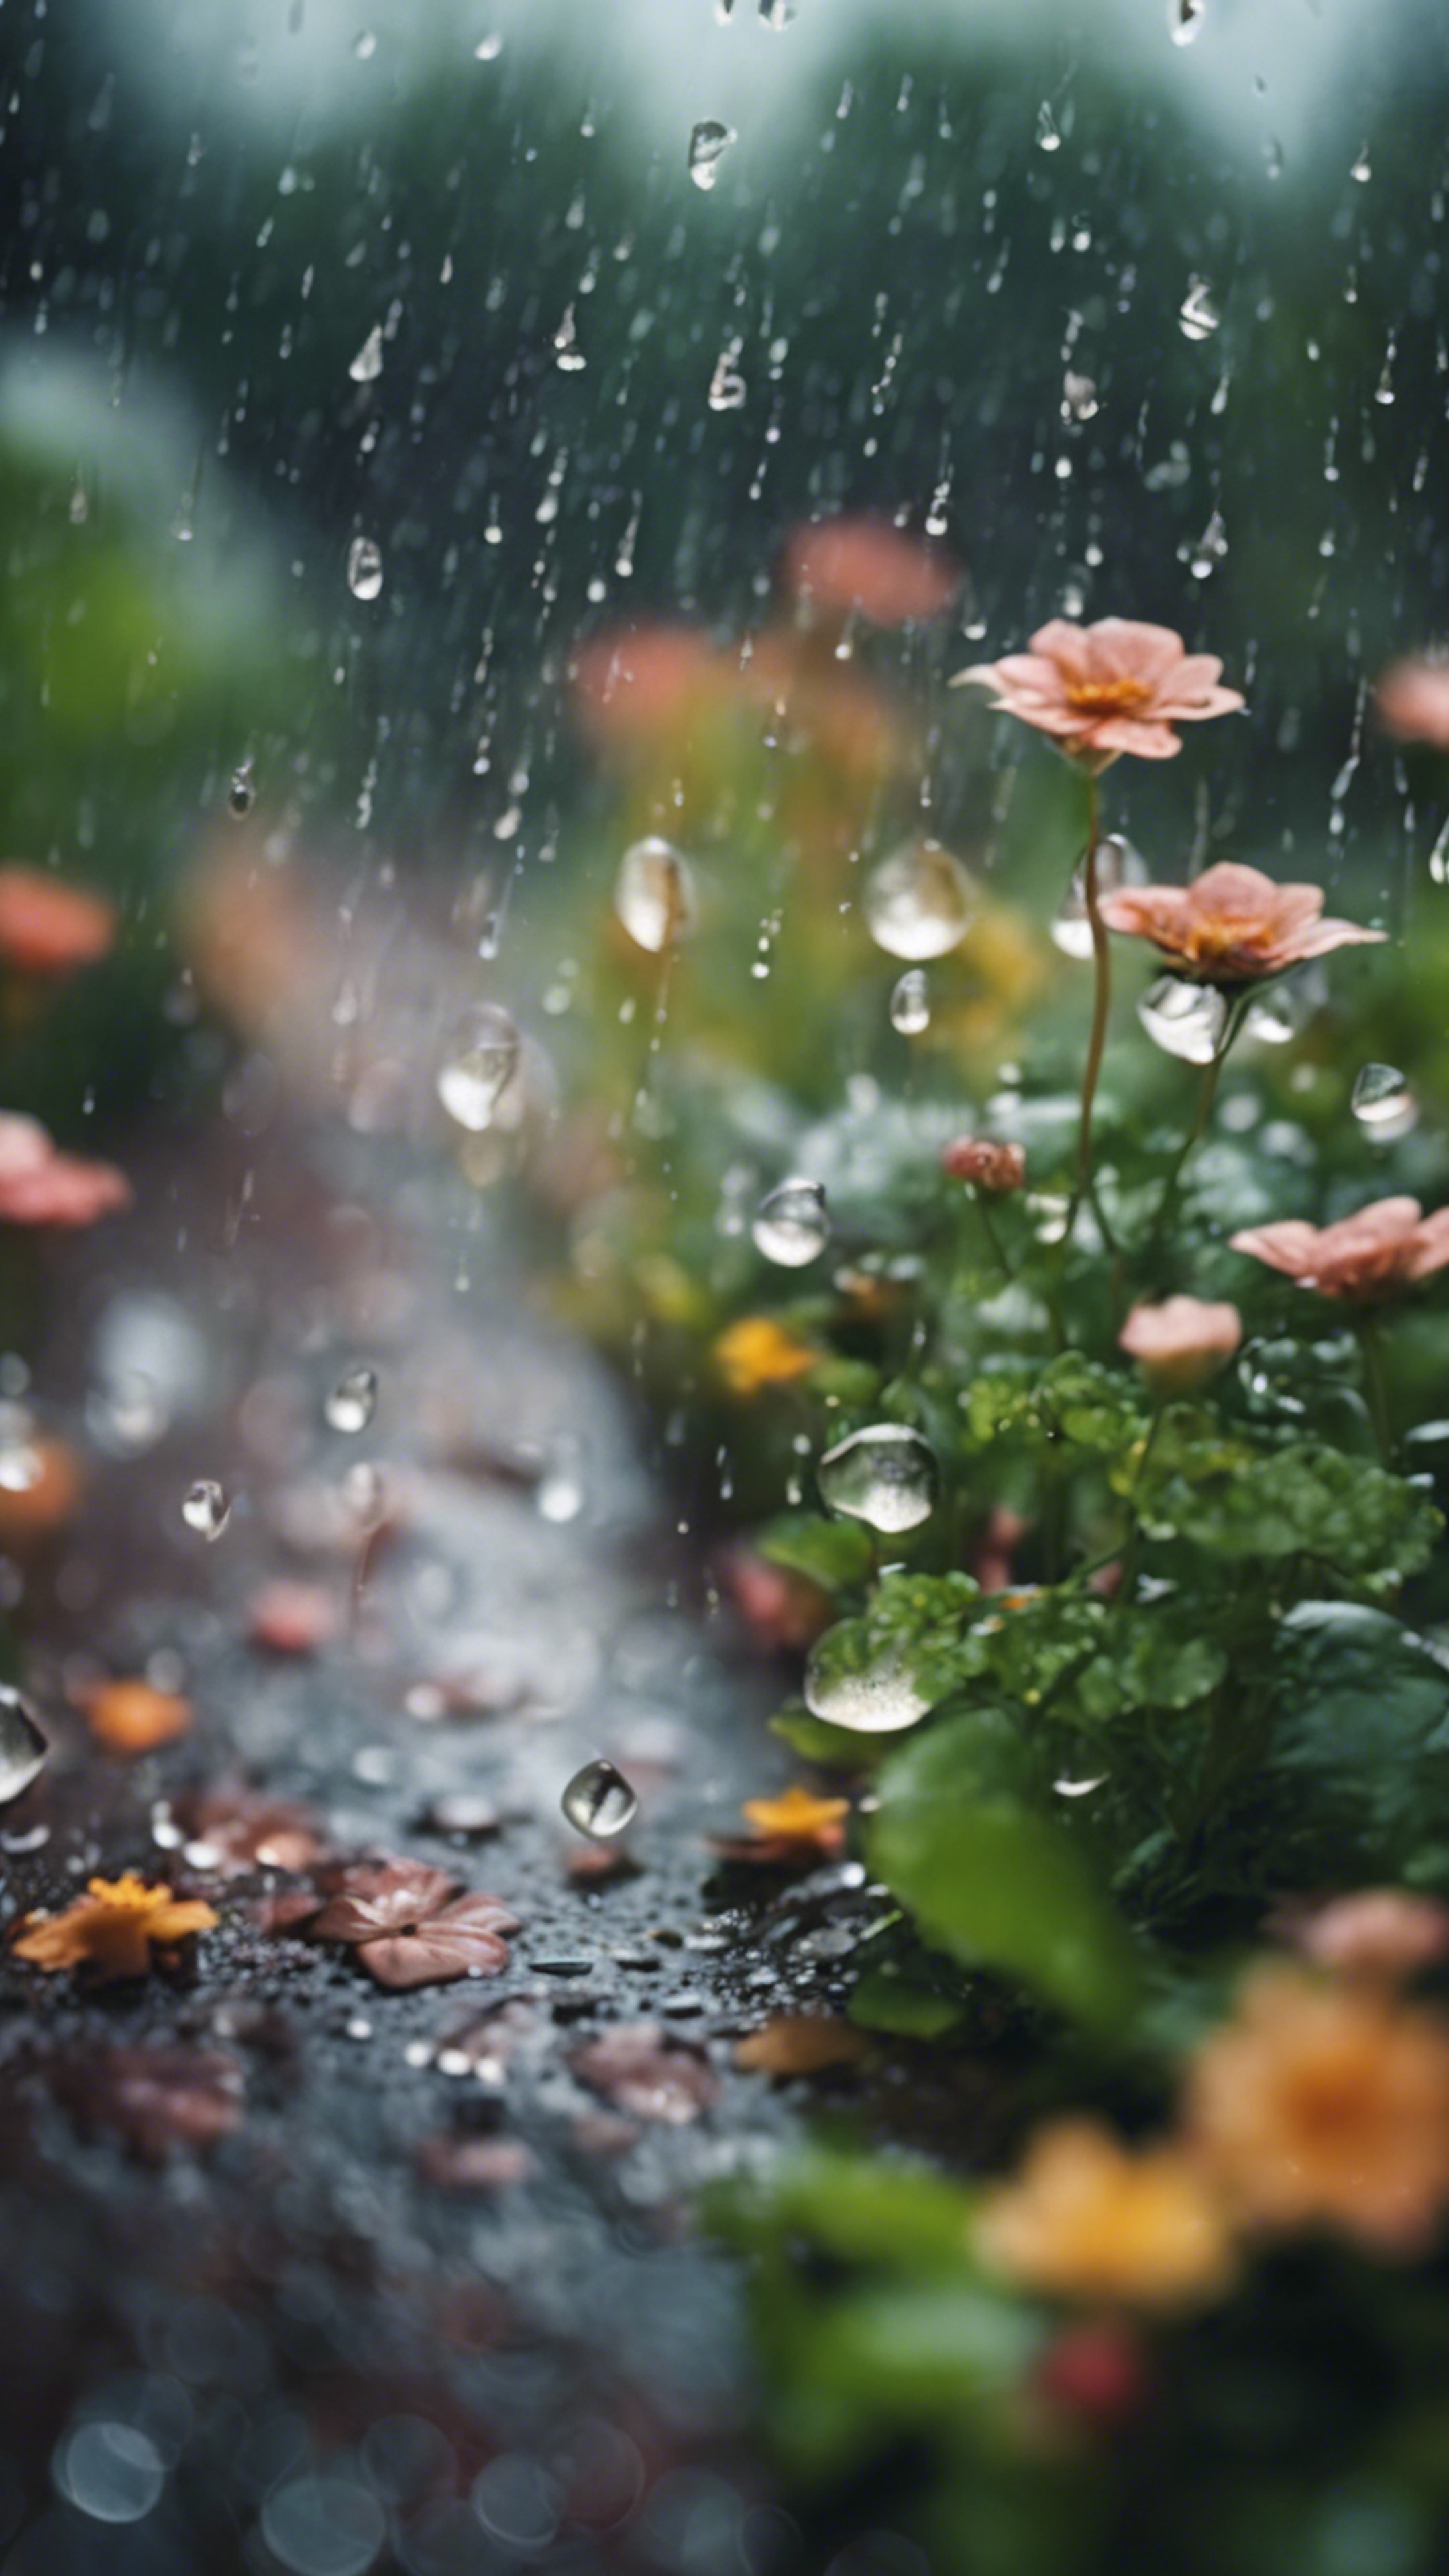 A tinkling rain garden during a soft rain shower, with raindrops dancing on the leaves and petals. 墙纸[725596f4b8c5433598b7]